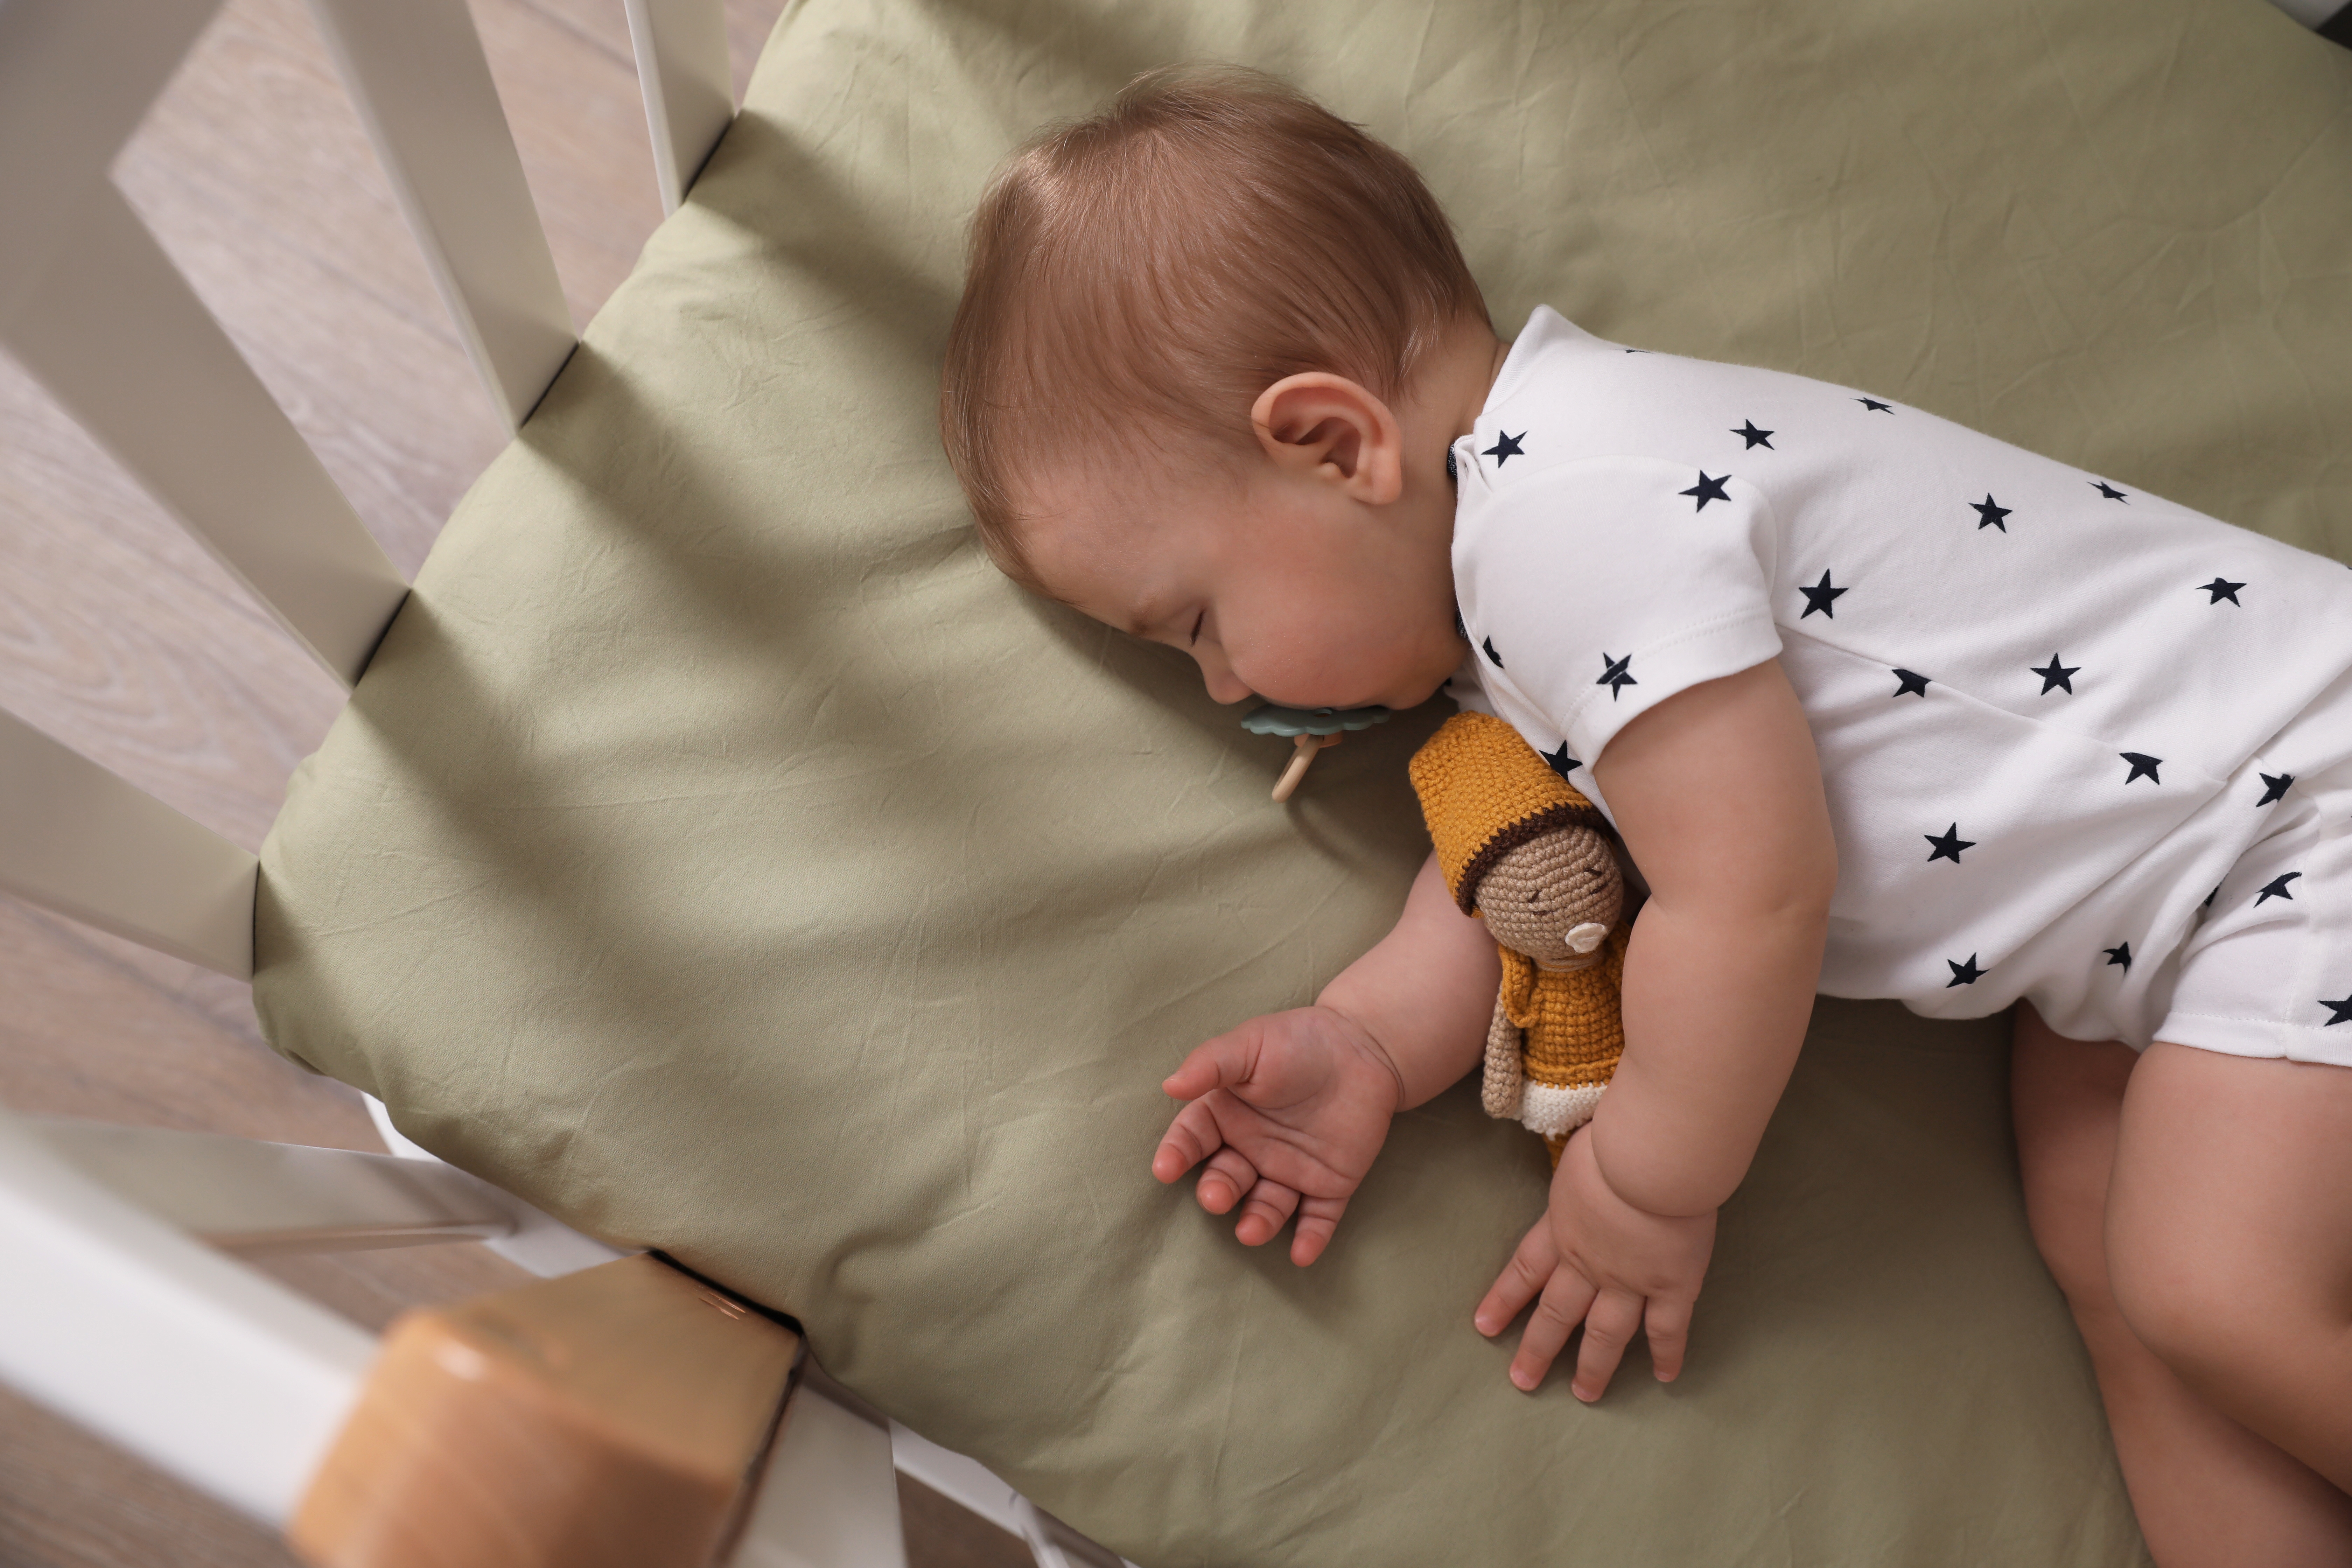 Adorable little baby with pacifier and toy sleeping in crib | Source: Shutterstock